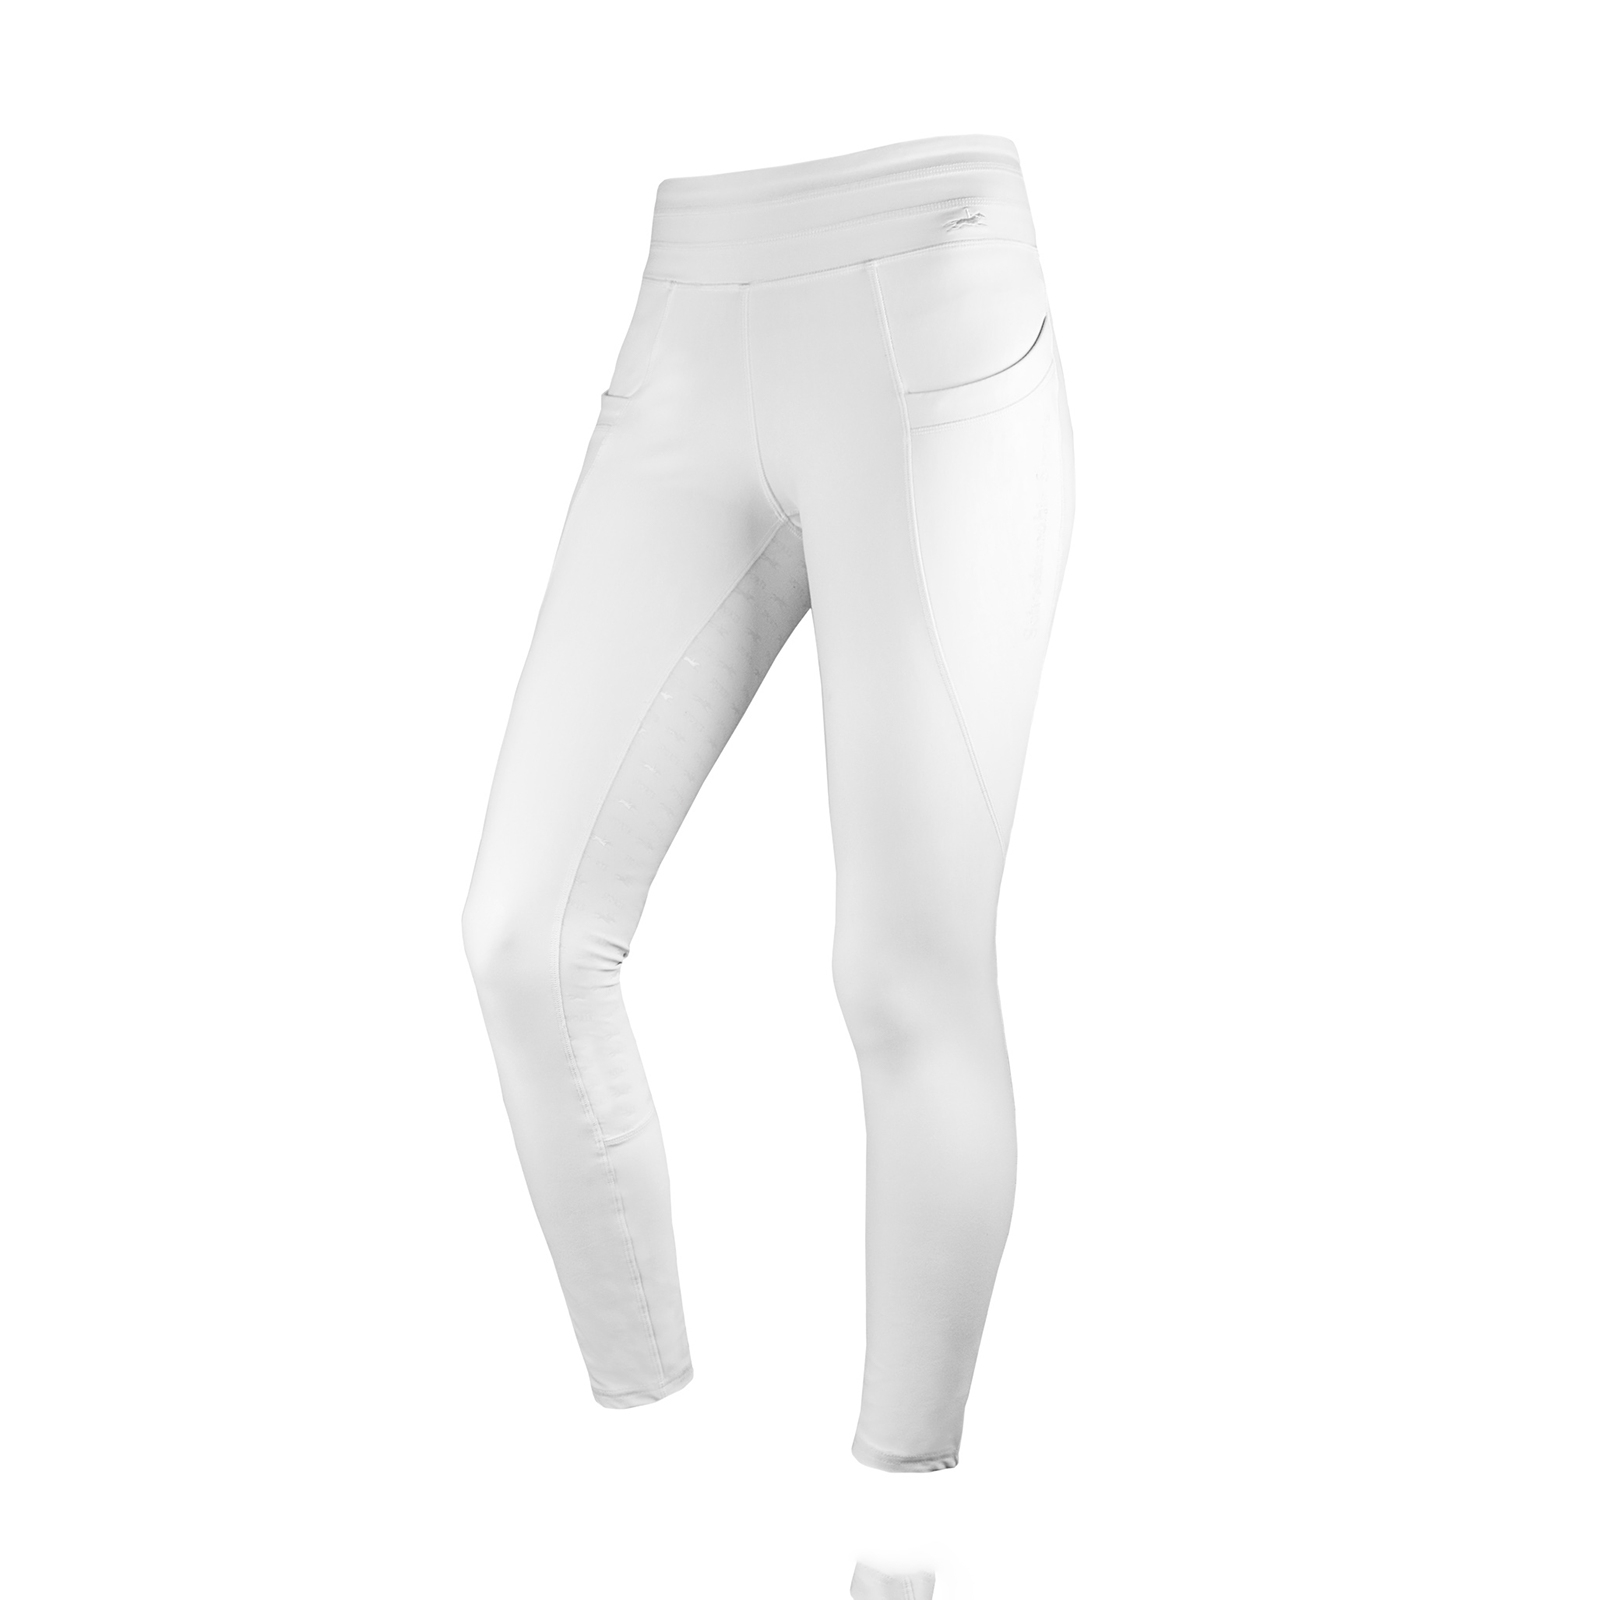 Schockemöhle Cooling Fullgrip Tights for Women